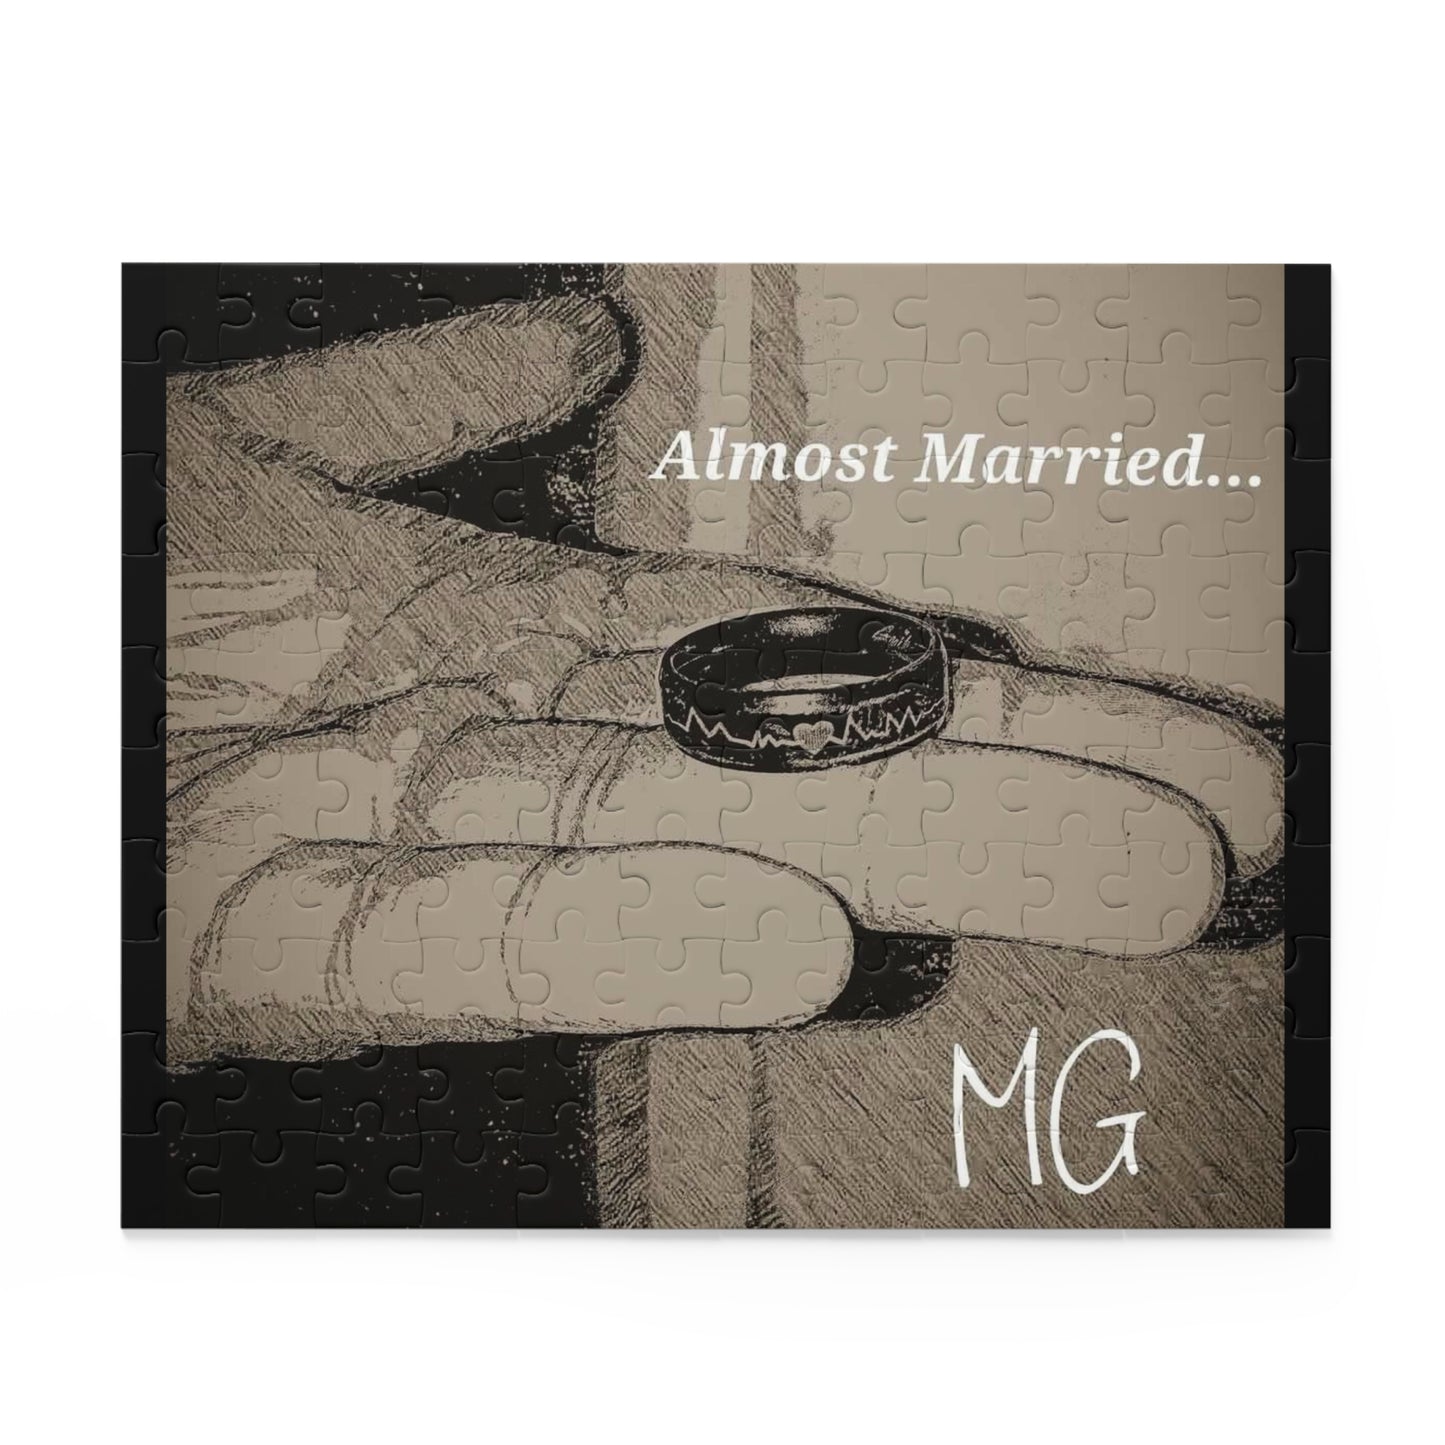 Almost Married MG Puzzle